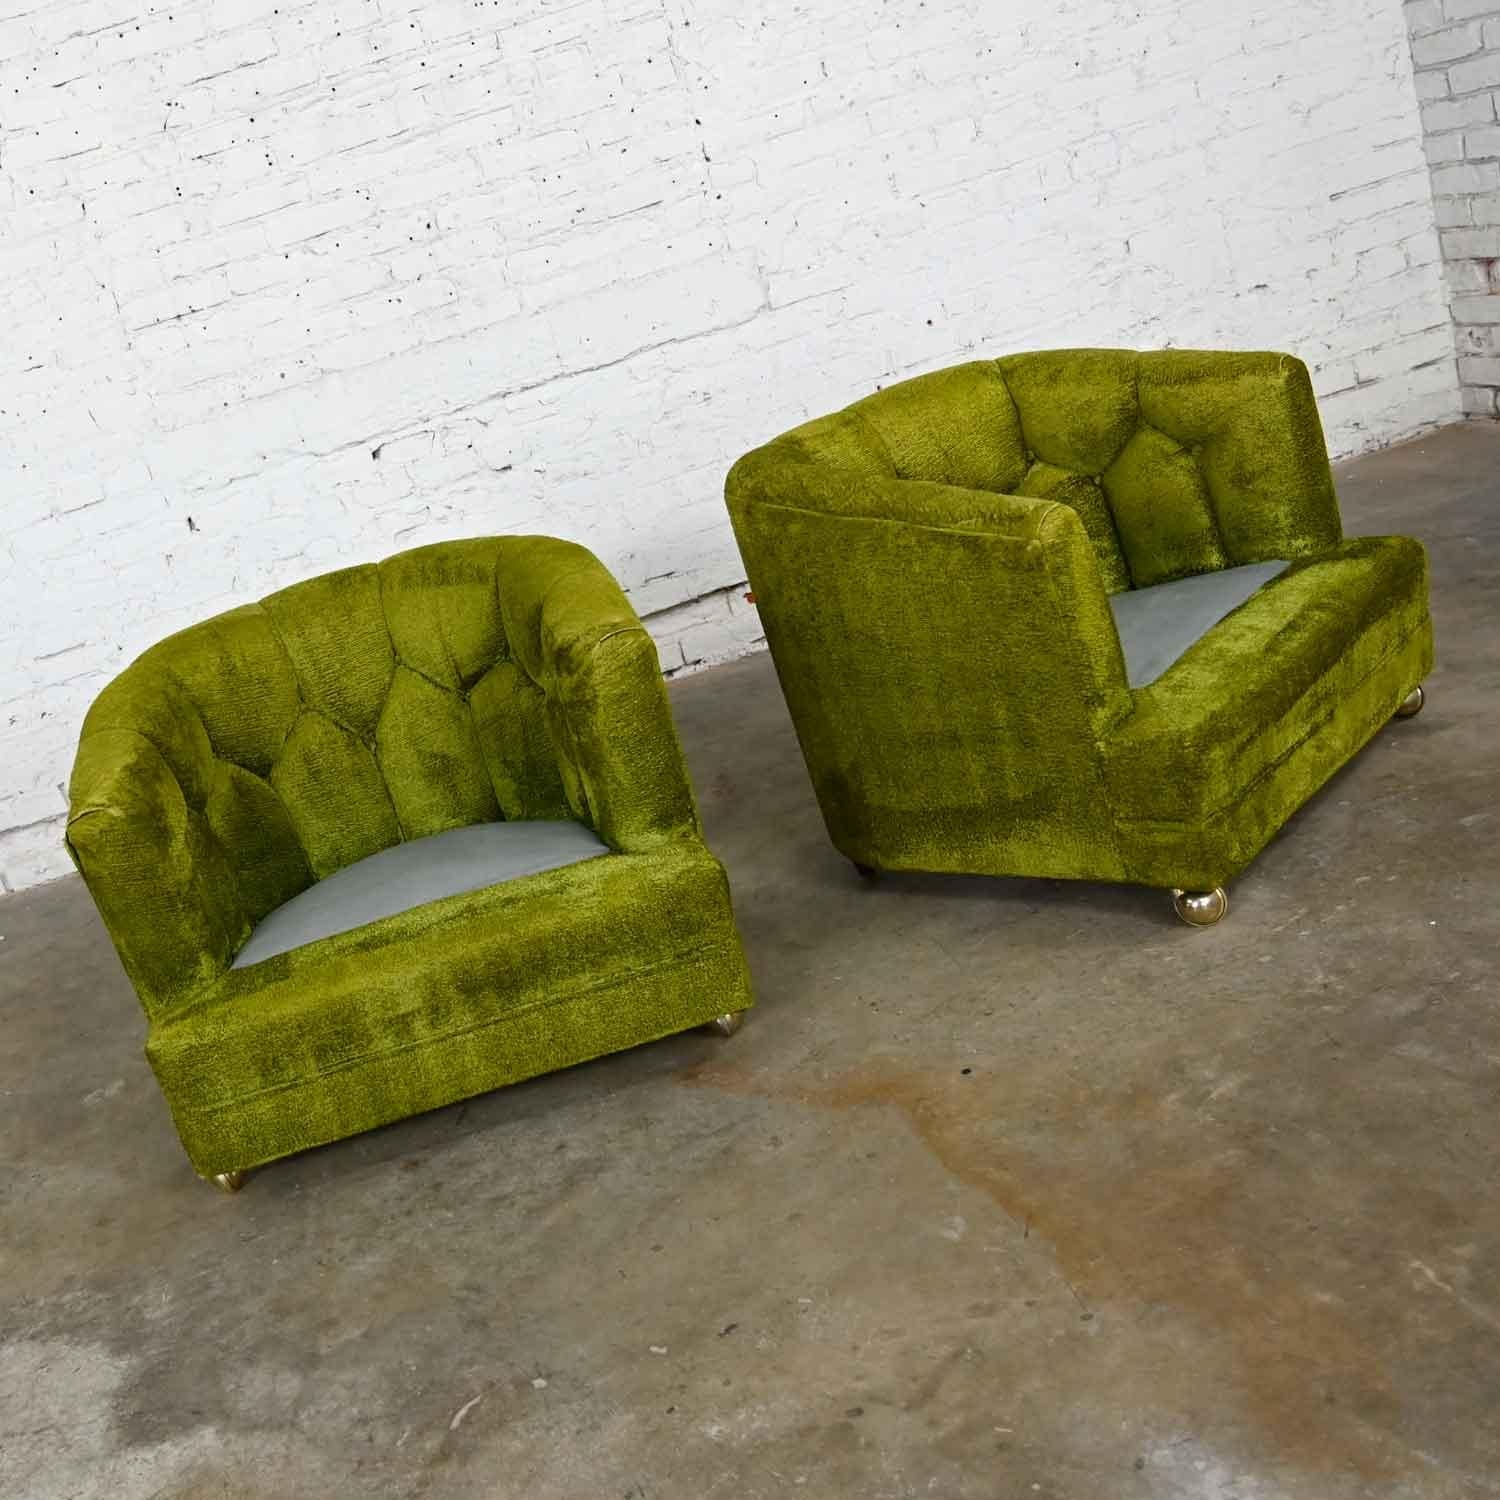 Gorgeous Hollywood Regency avocado green crushed chenille button tufted barrel chairs with new brass ball casters on front legs and small tapered legs on back and new dust covers. Beautiful condition, keeping in mind that this is vintage and not new